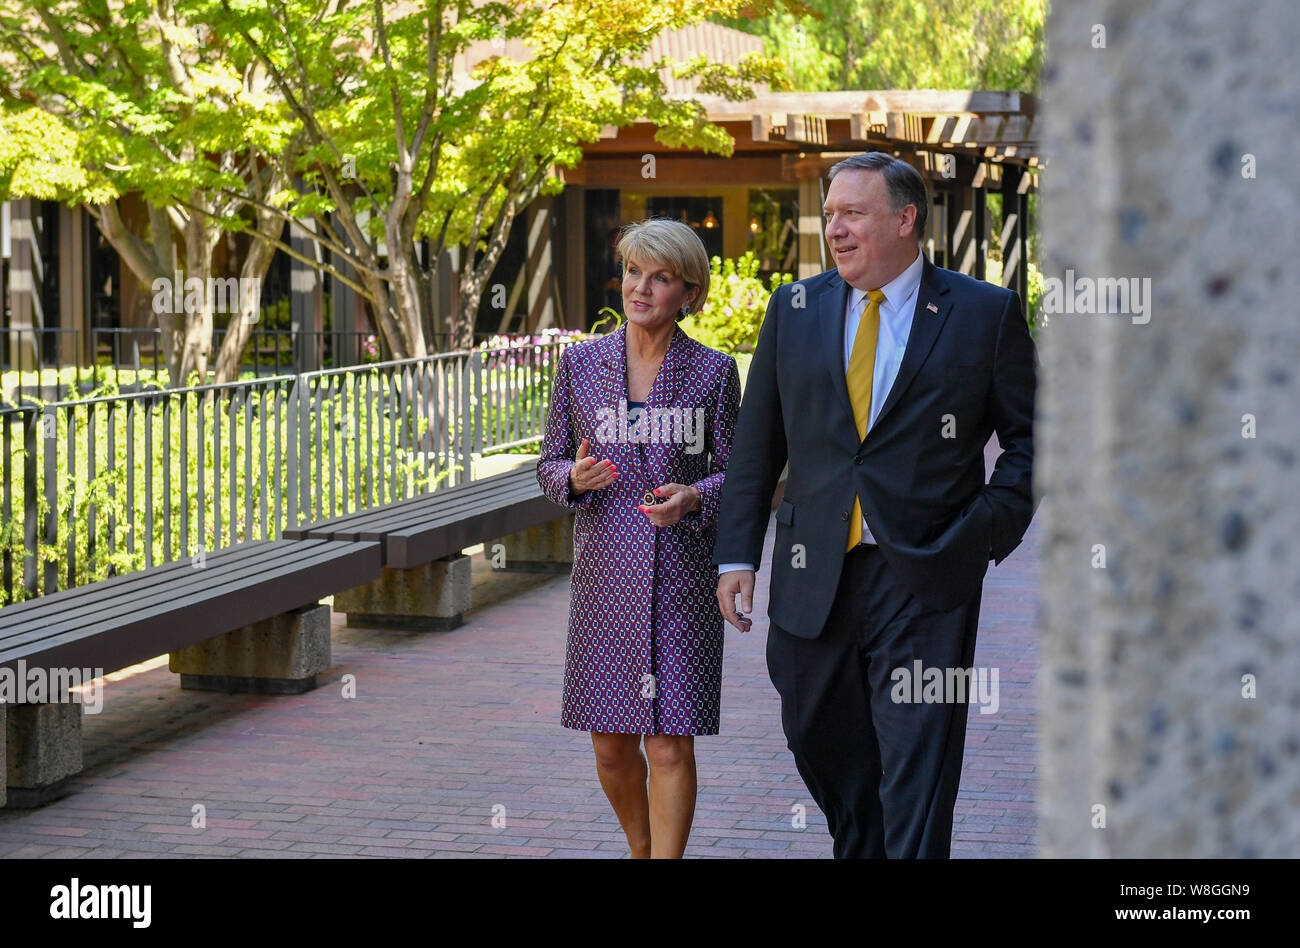 U.S. Secretary of State Michael R. Pompeo and Australian Foreign Minister Julie Bishop go for a walk on the campus of Stanford University in Palo Alto Stock Photo